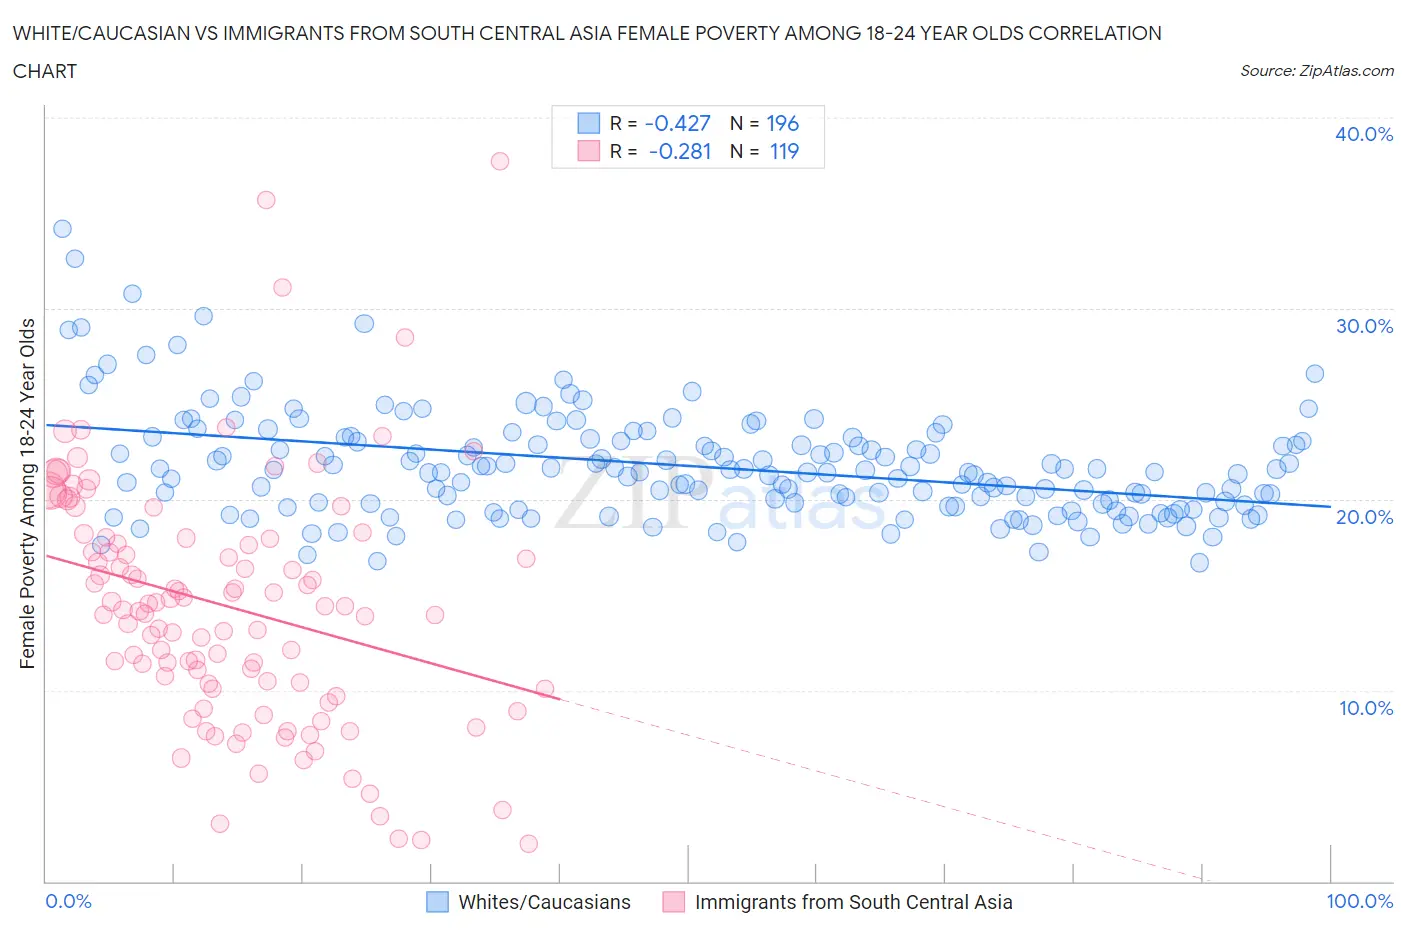 White/Caucasian vs Immigrants from South Central Asia Female Poverty Among 18-24 Year Olds